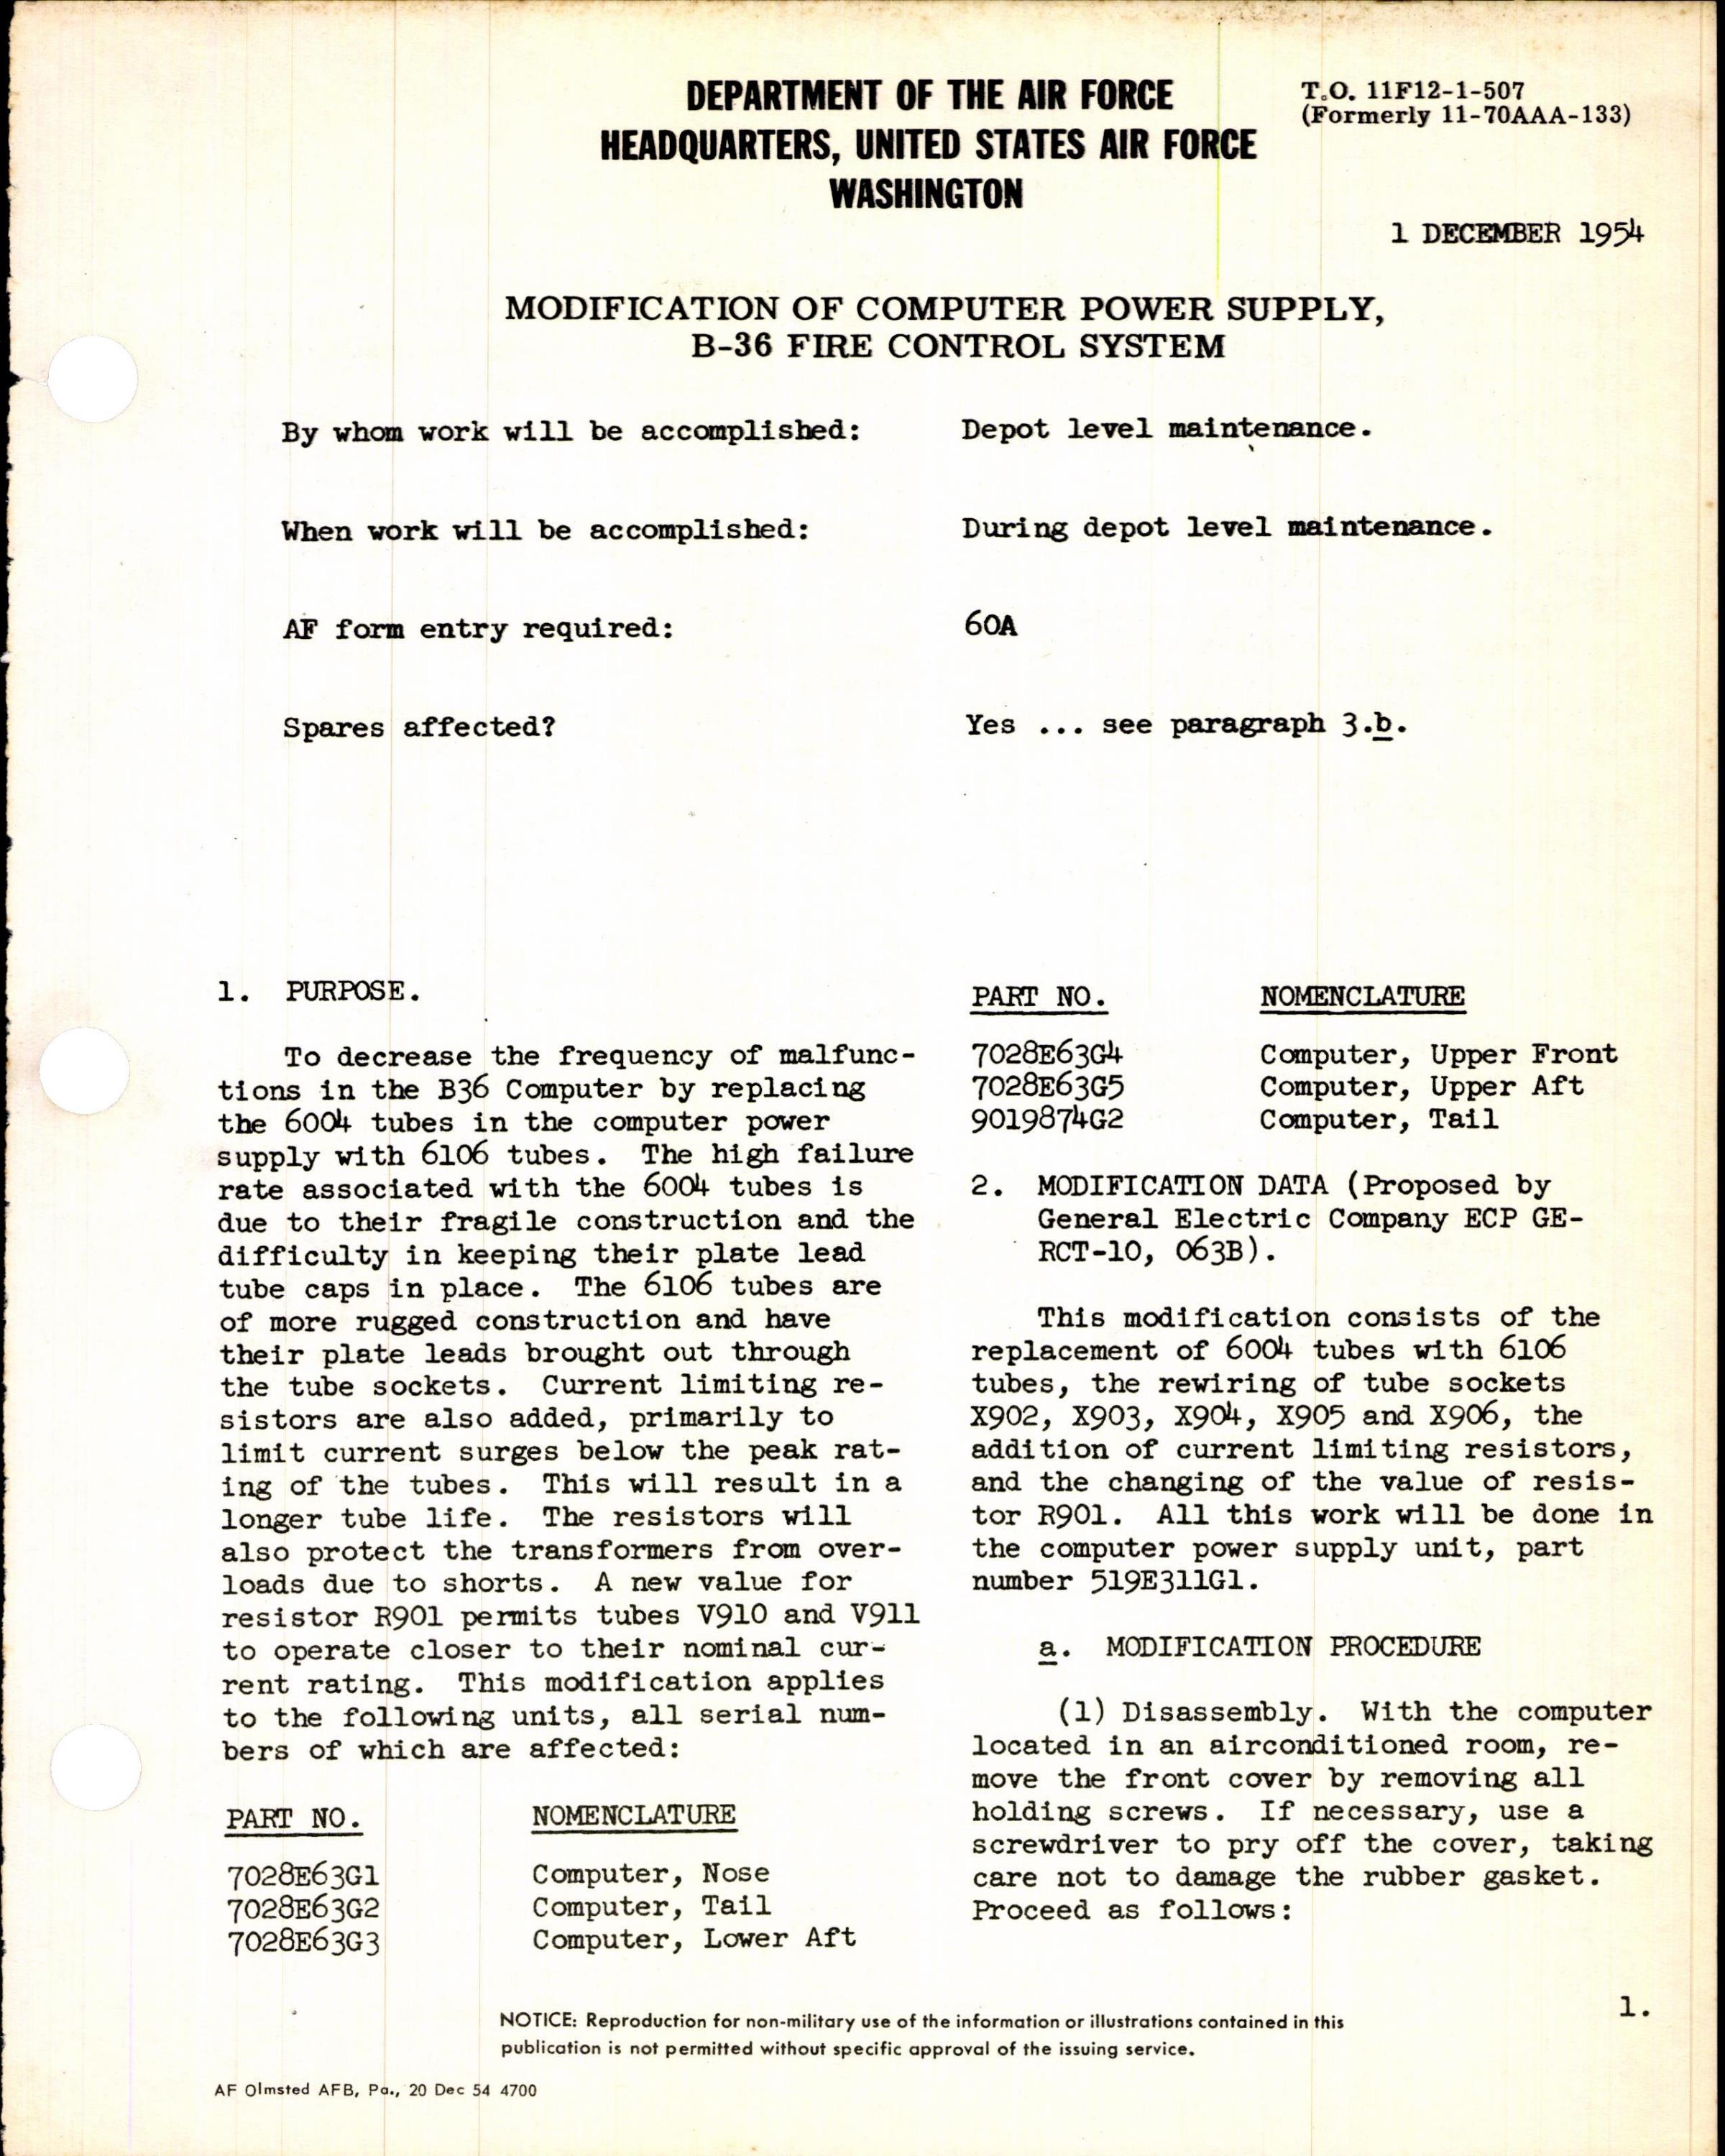 Sample page 1 from AirCorps Library document: Modification of Computer Power Supply for B-36 Fire Control System